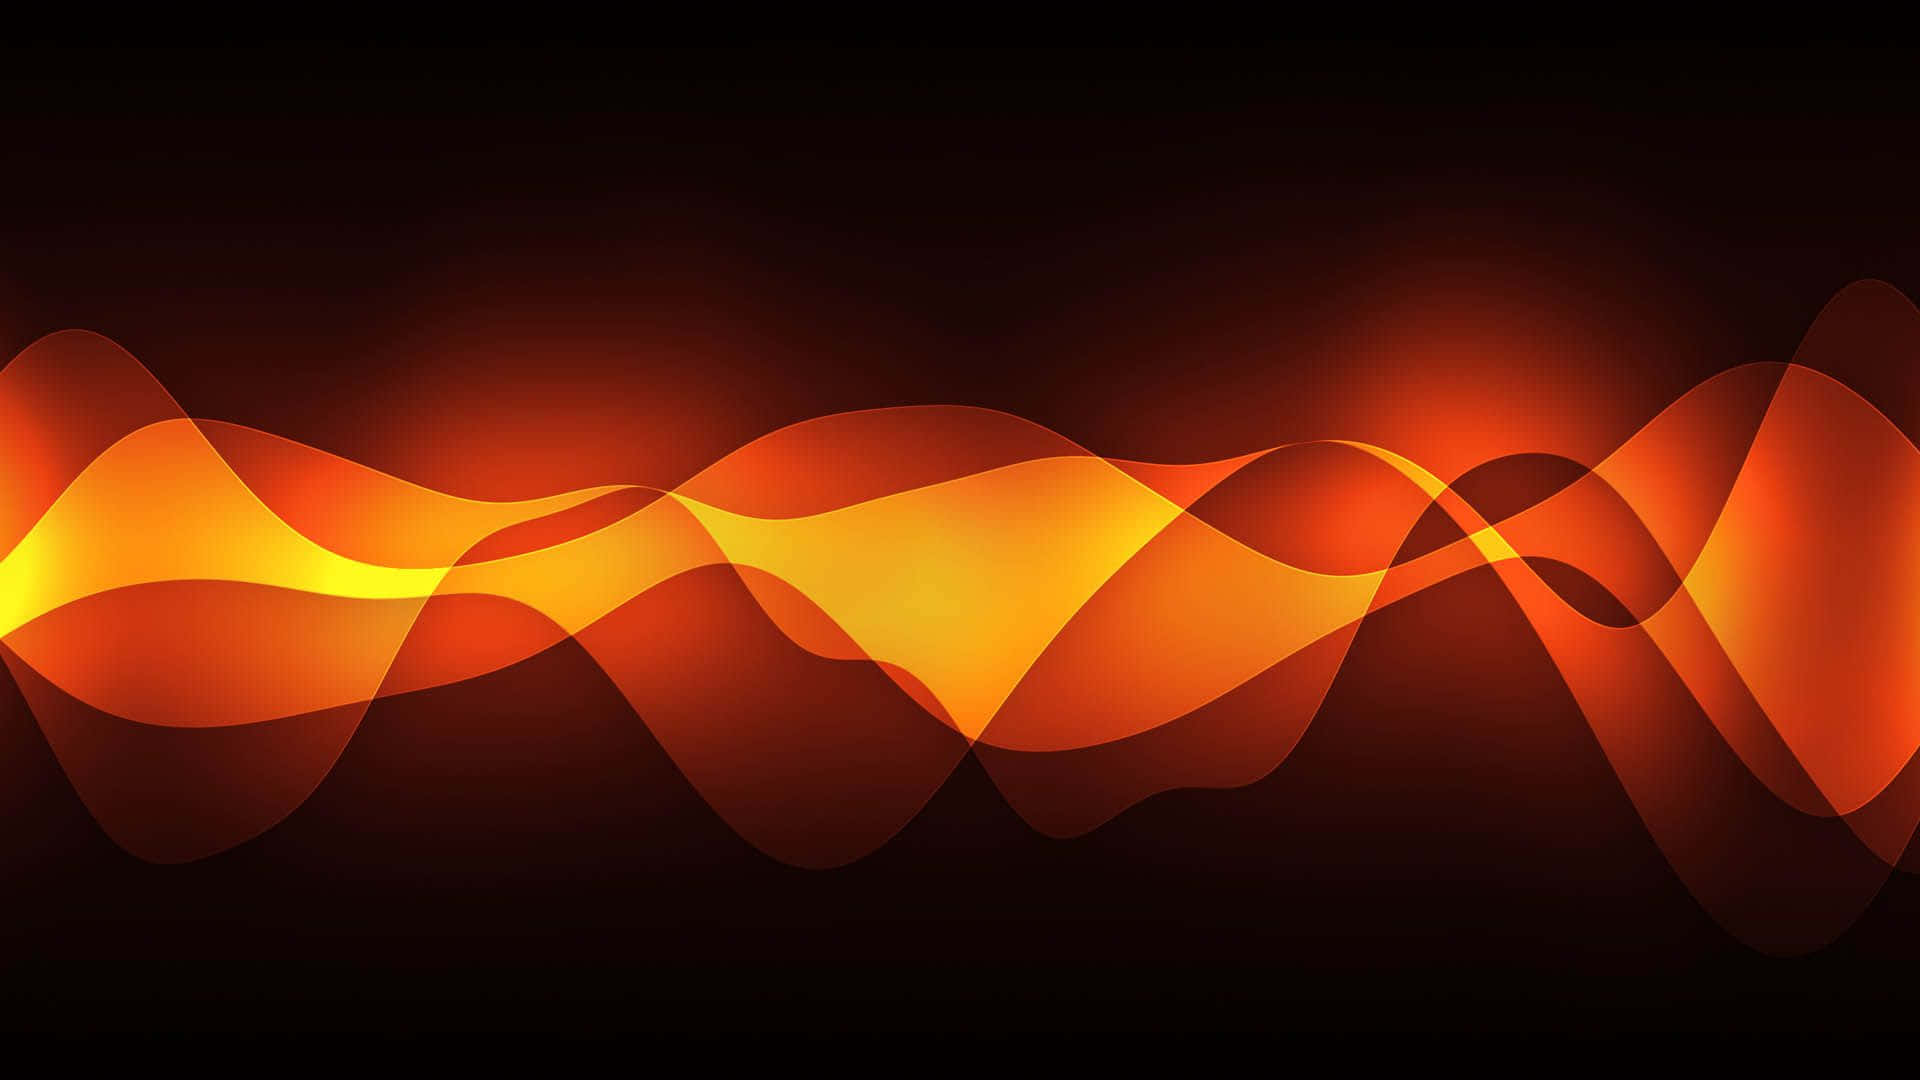 8400 Orange And Black Abstract Background Illustrations RoyaltyFree  Vector Graphics  Clip Art  iStock